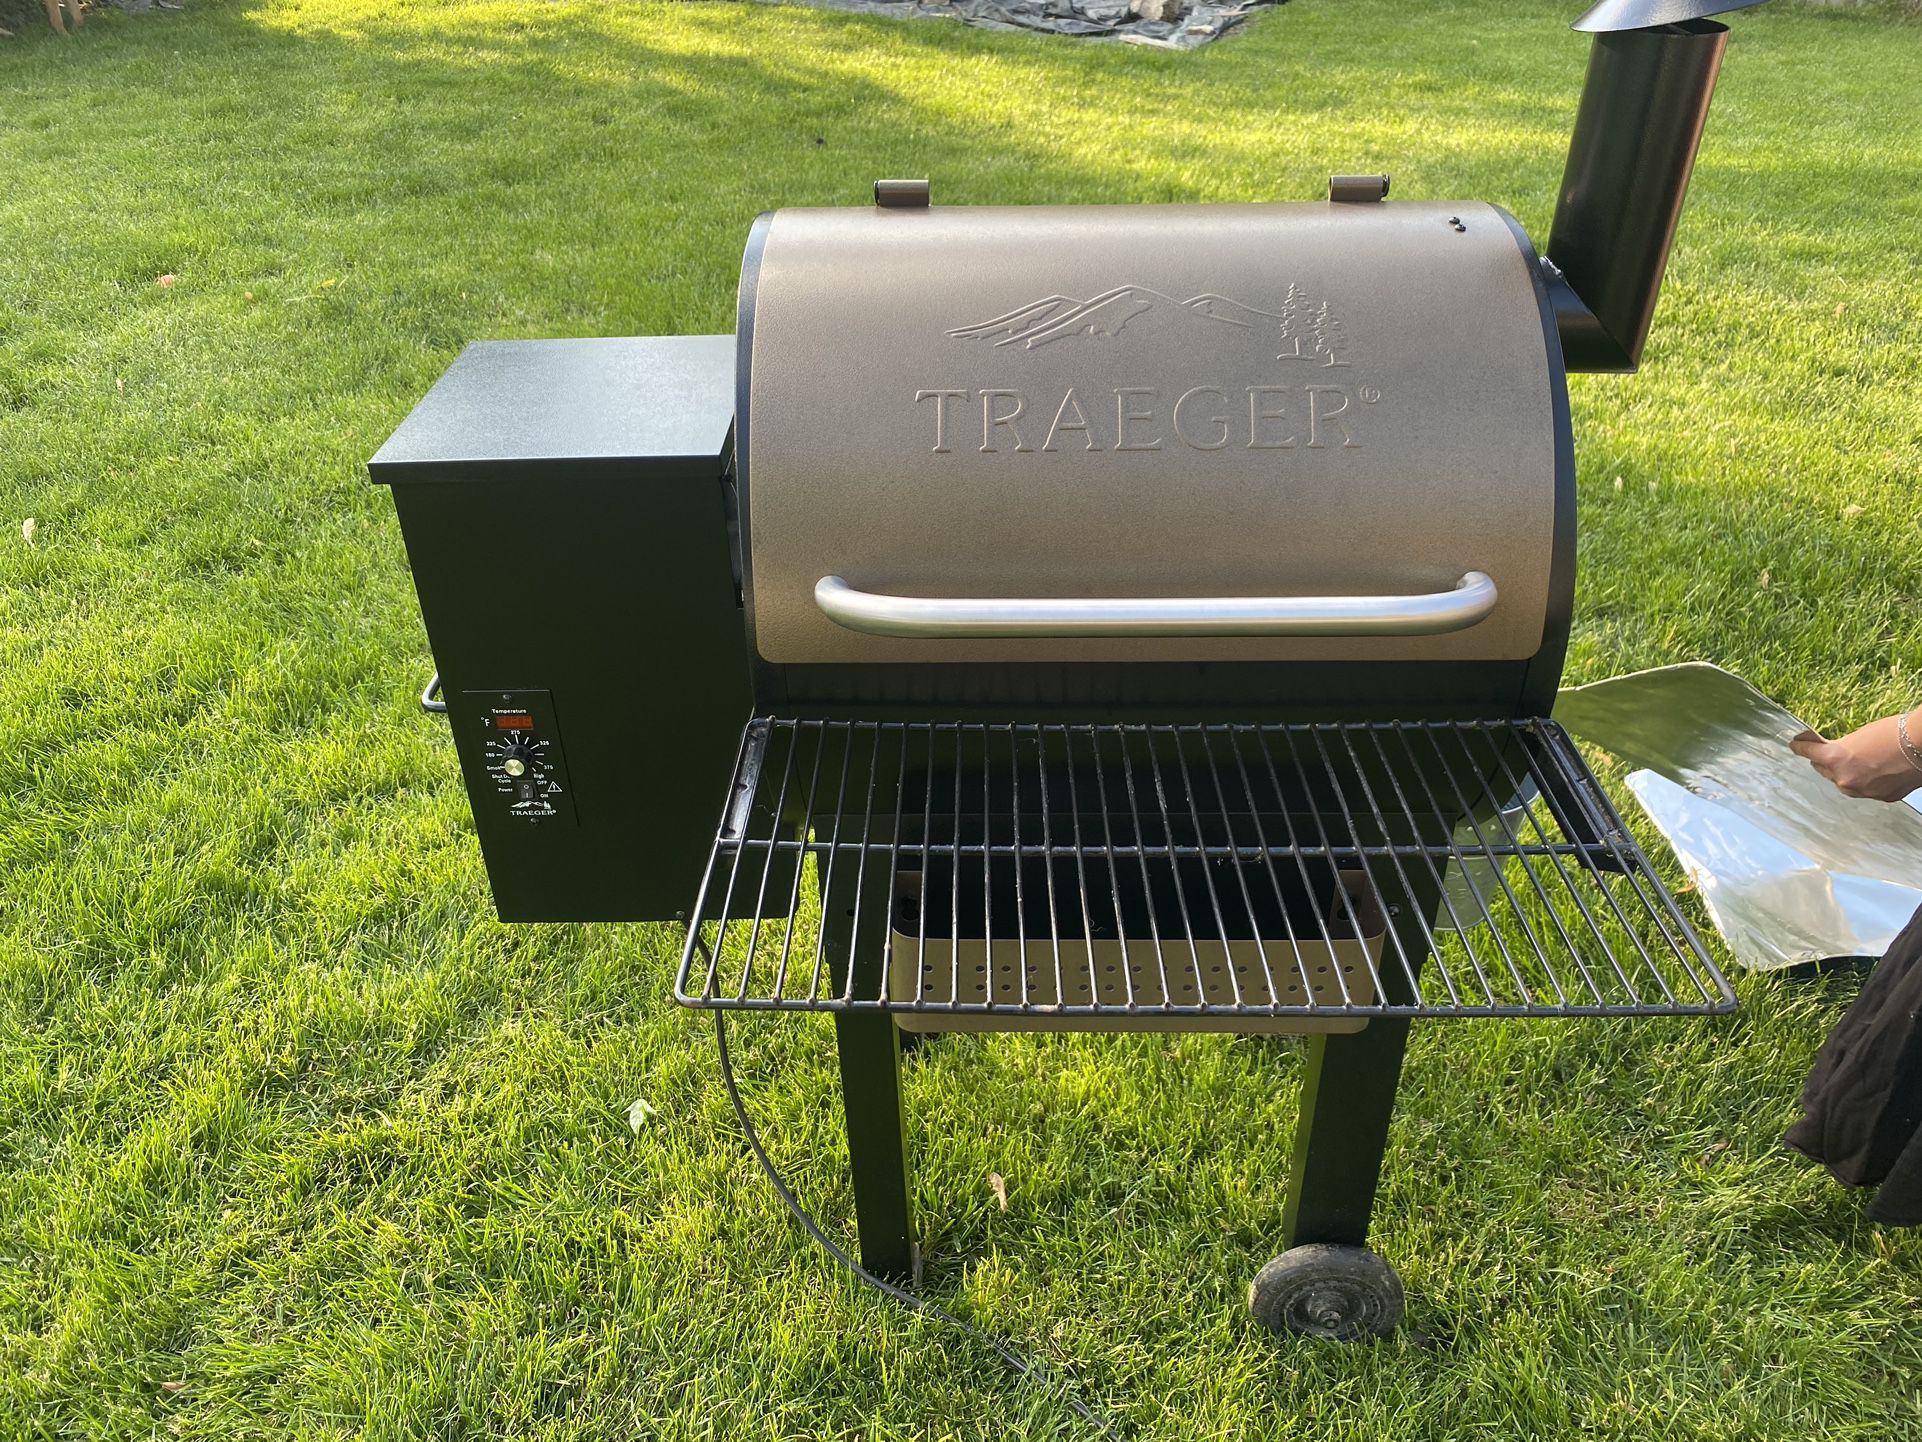 Pro 22inch Pellet Grill in Bronze with Cover